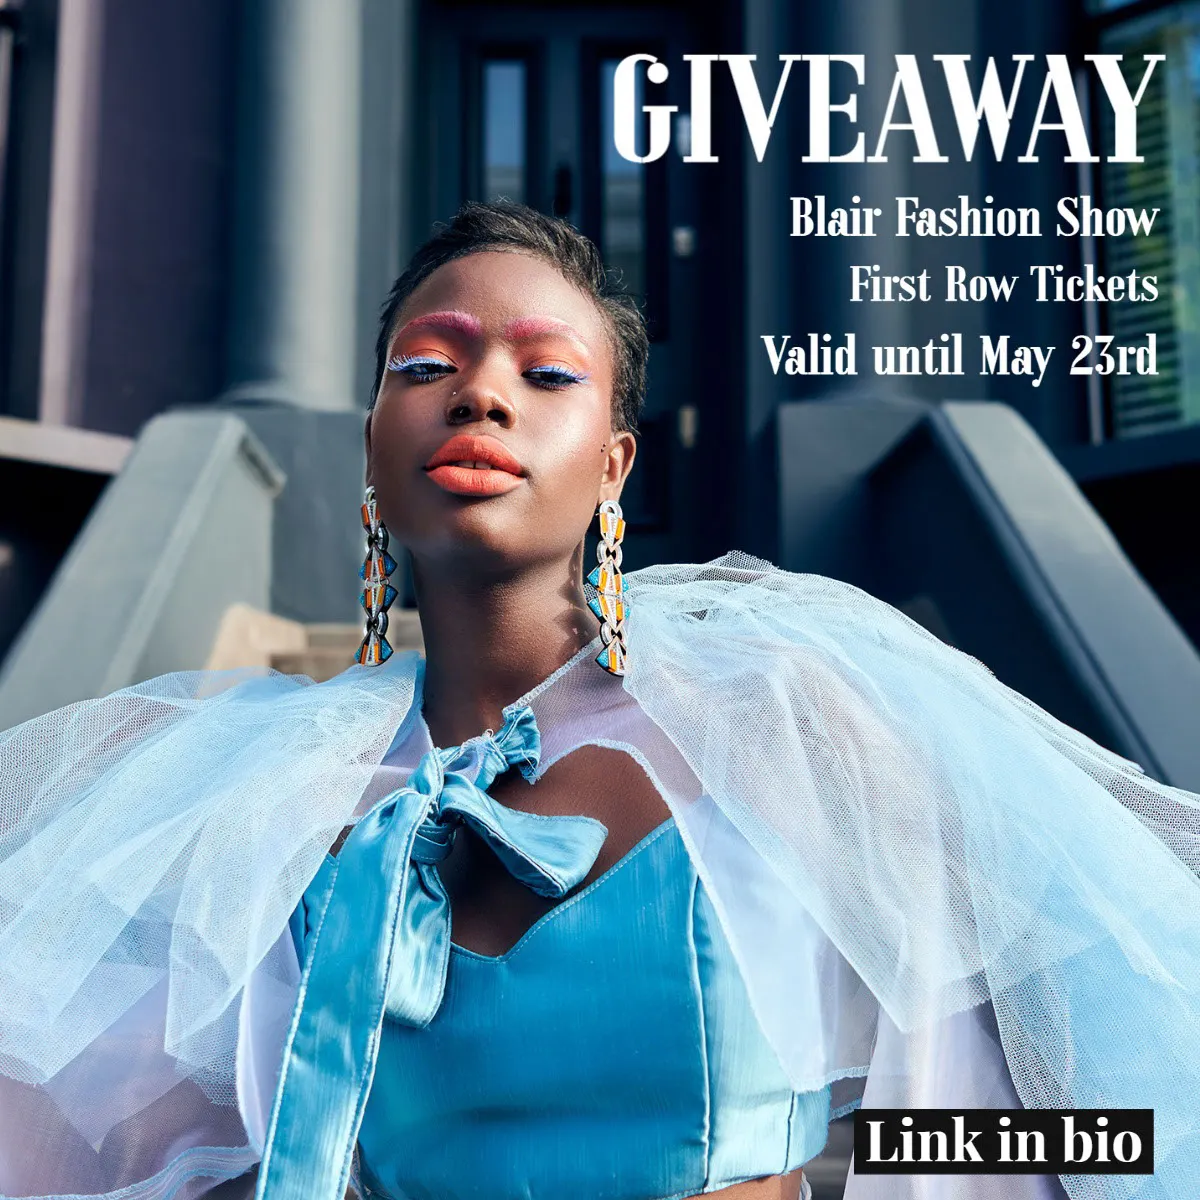 White, Blue and White Stylish Fashion Giveaway Instagram Square